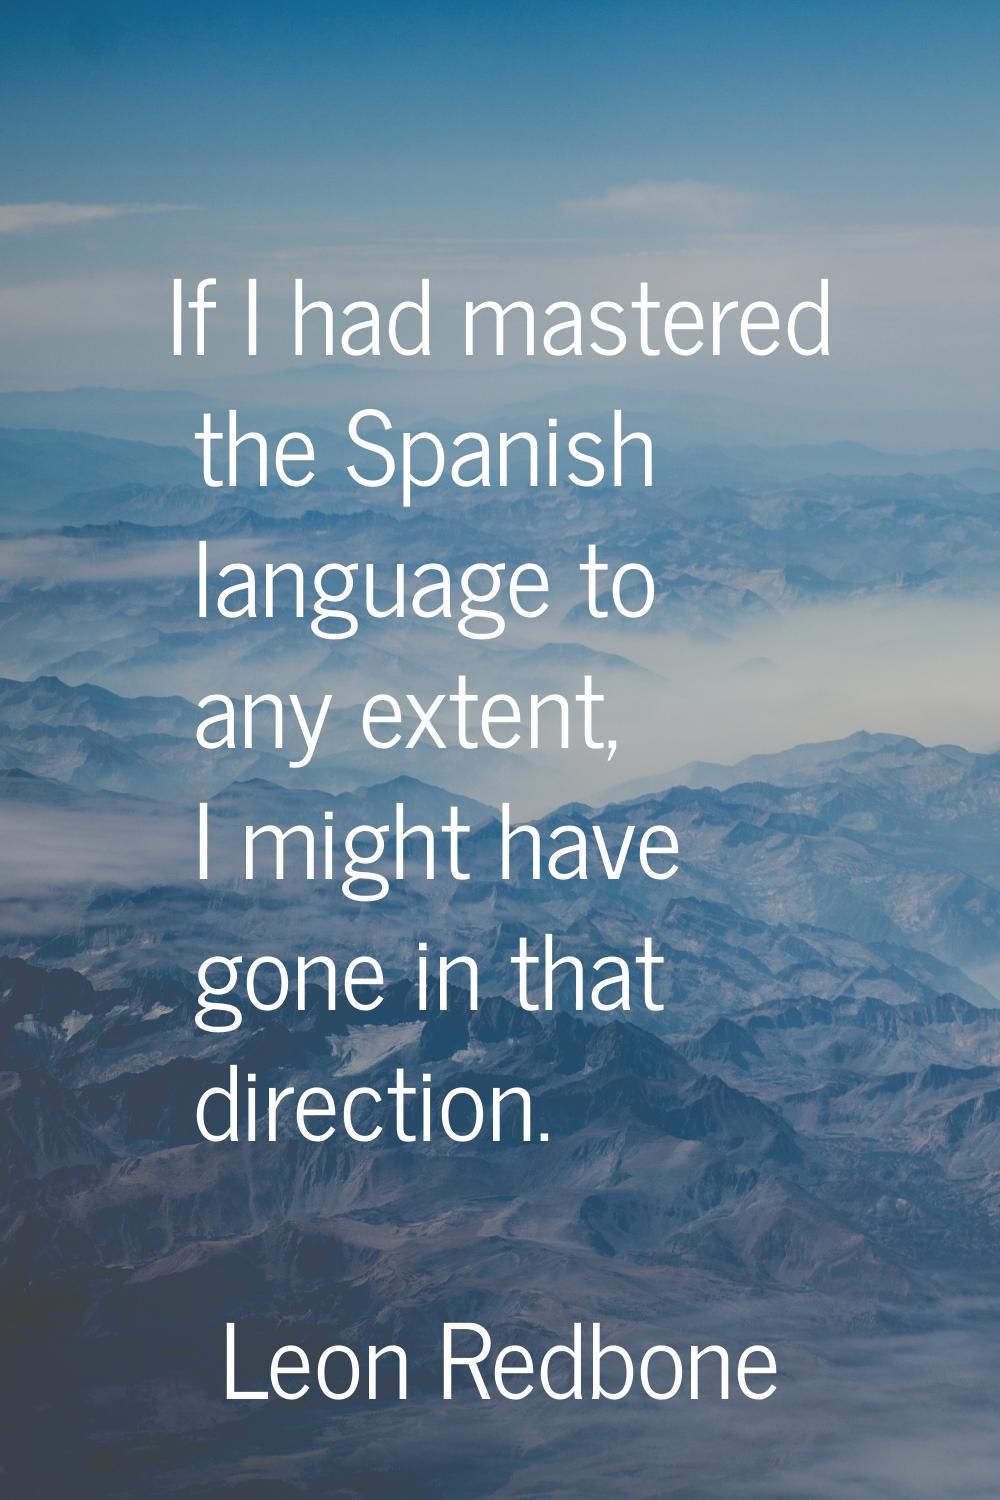 If I had mastered the Spanish language to any extent, I might have gone in that direction.